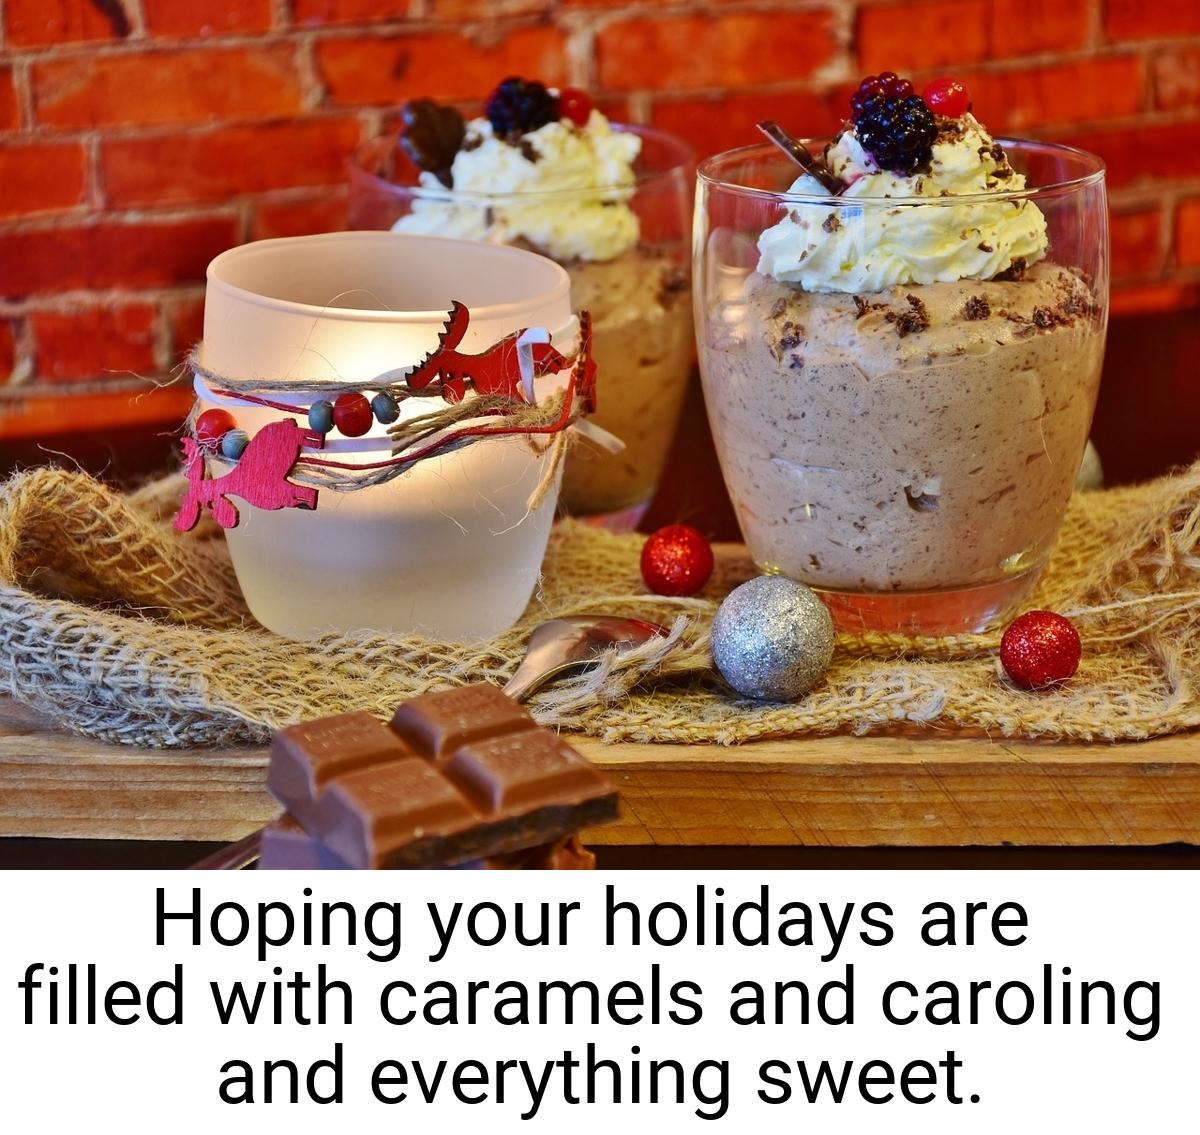 Hoping your holidays are filled with caramels and caroling